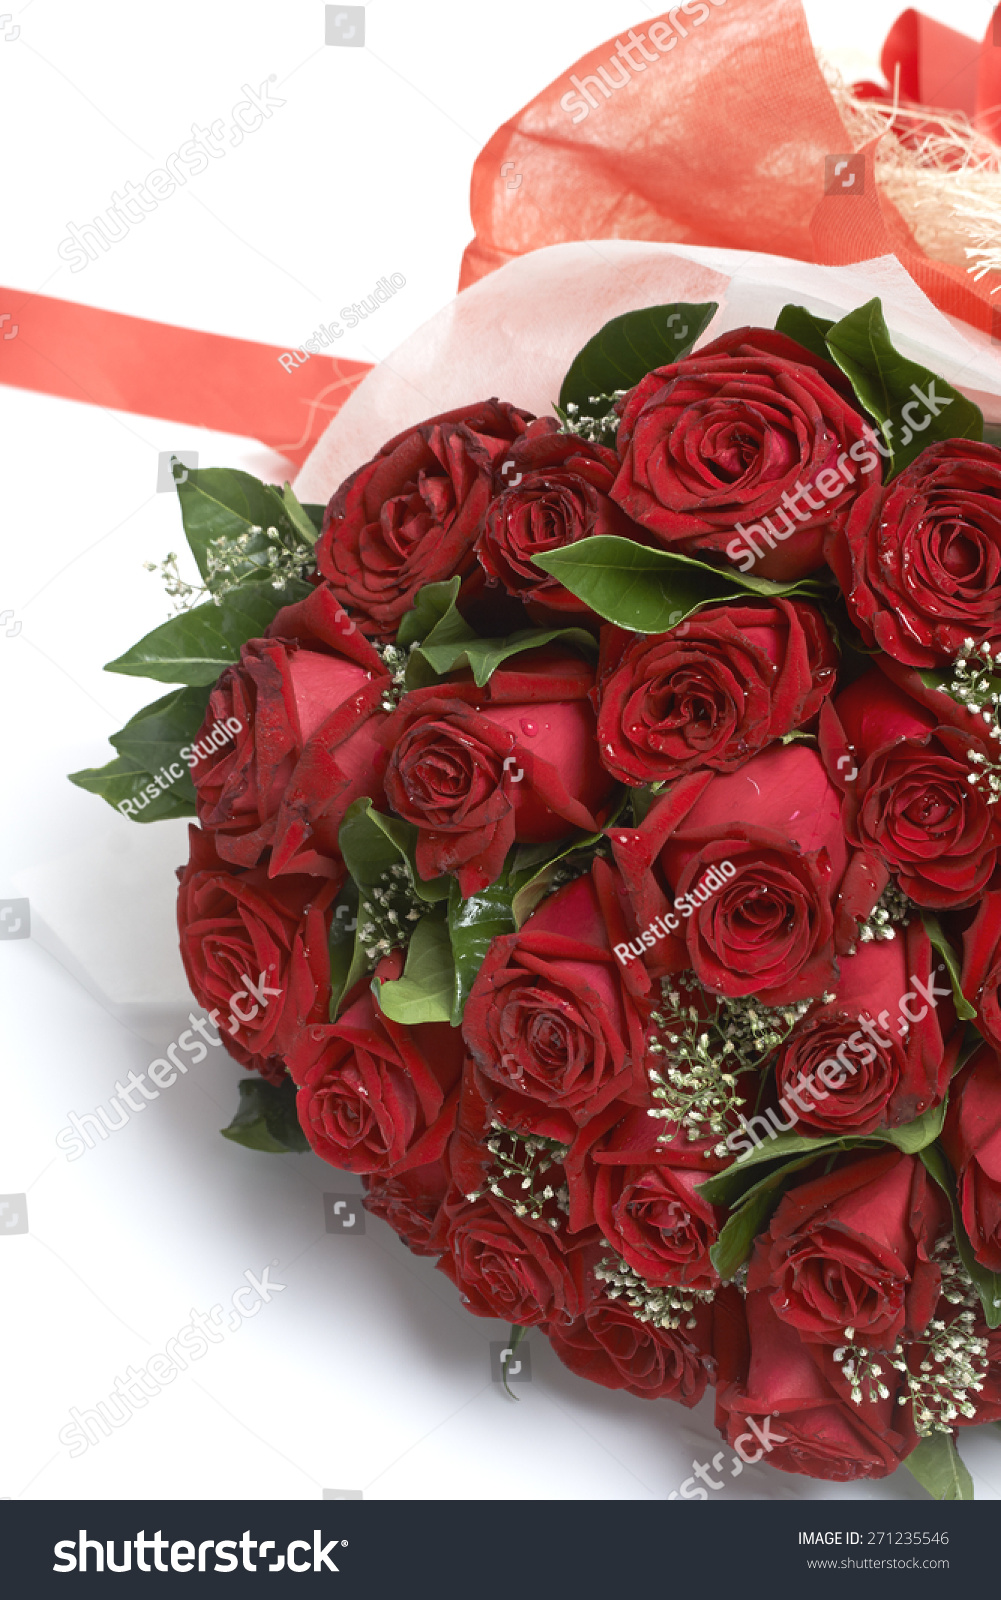 Bouquet of red roses #271235546